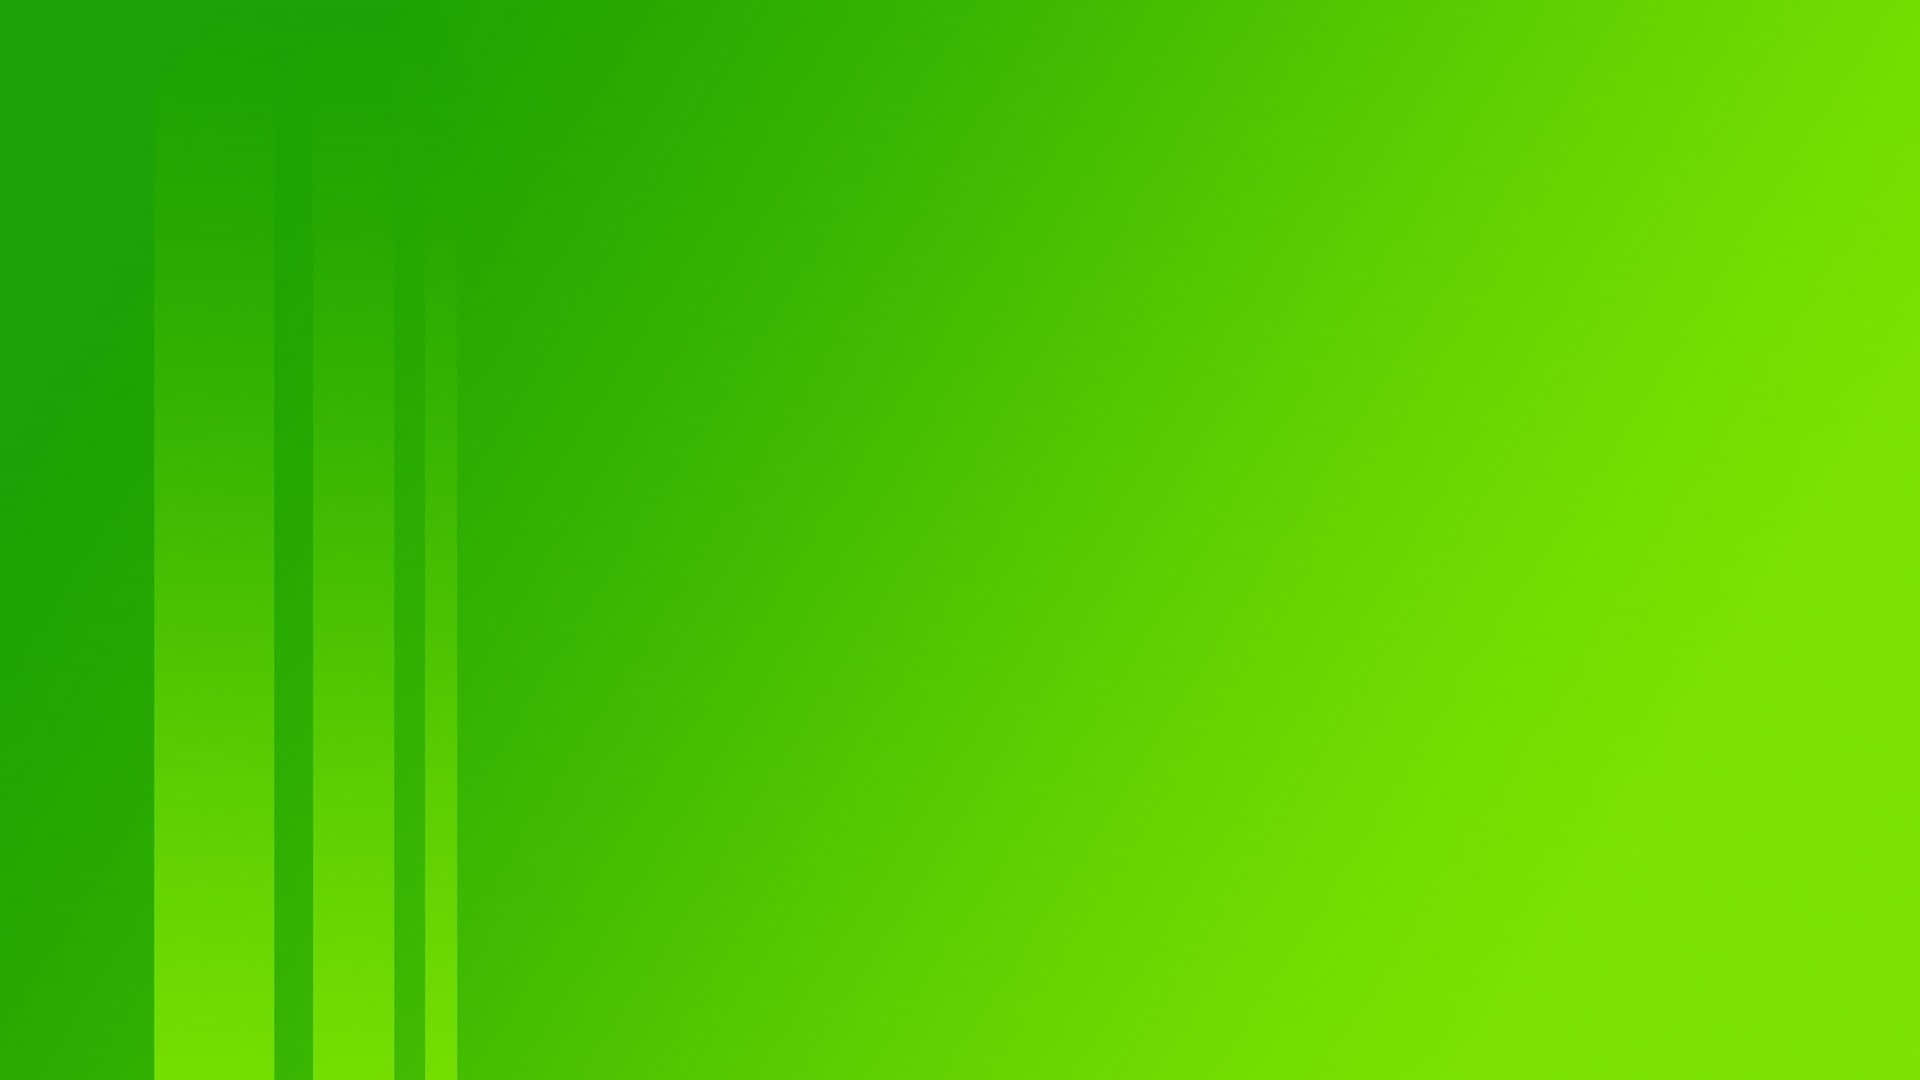 Green Background With A Horizontal Line